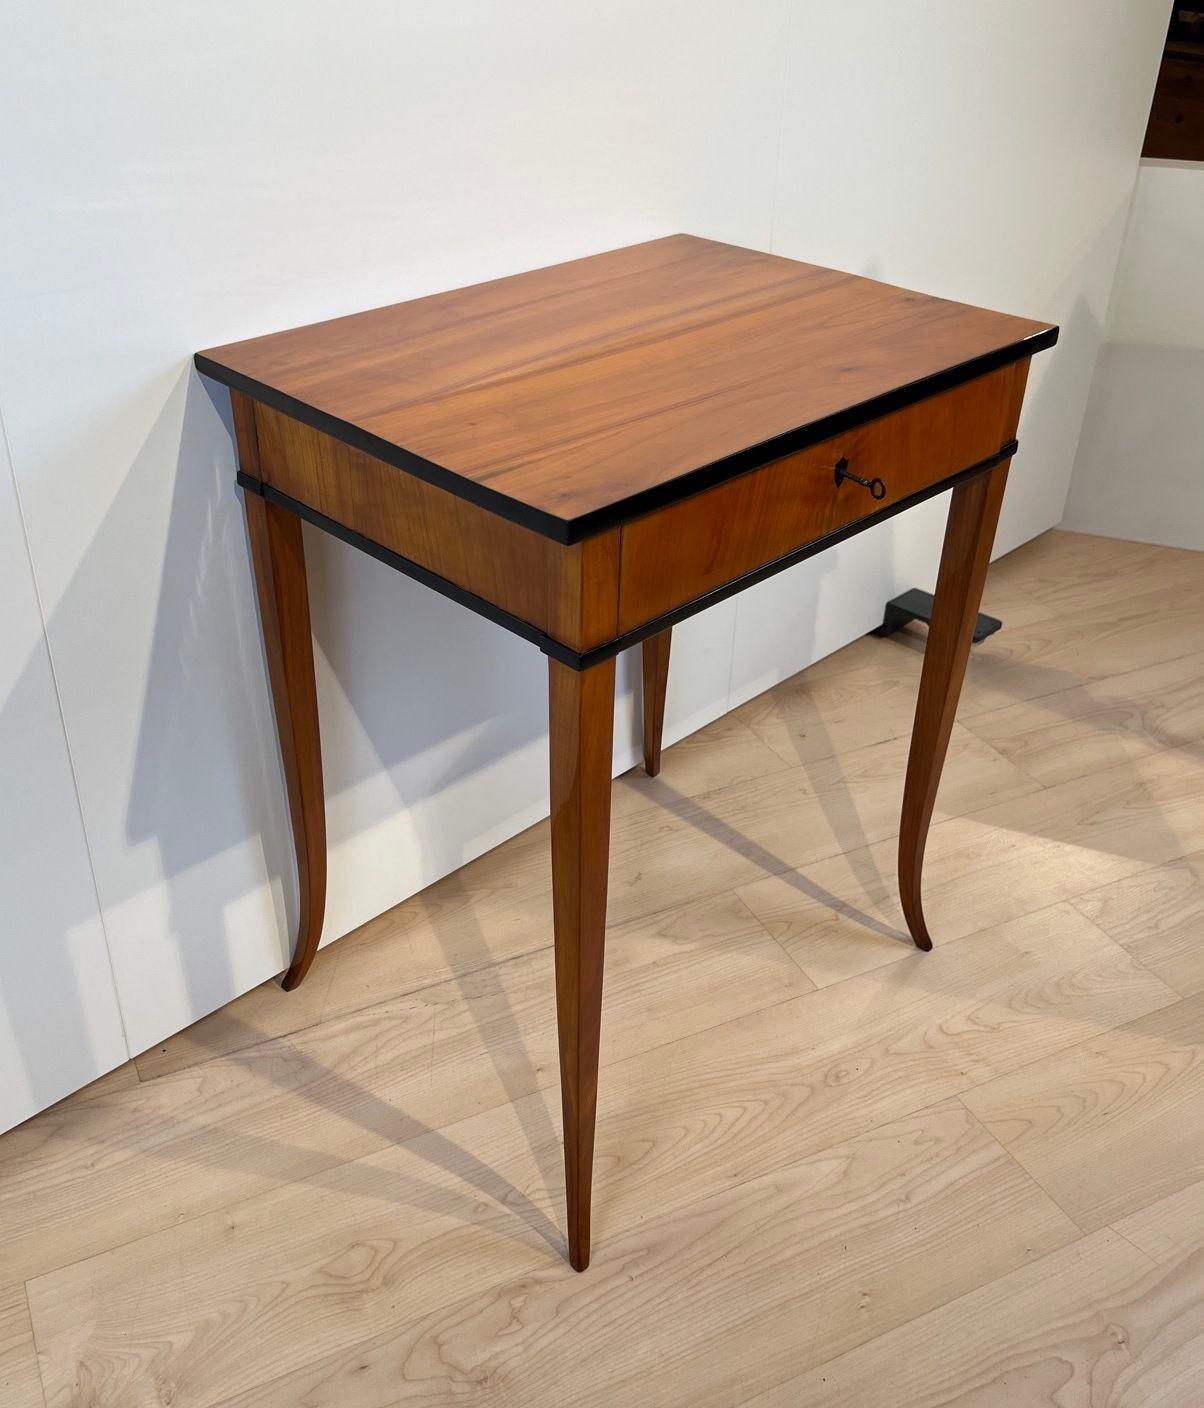 Beautiful original Biedermeier sewing or side table in cherry wood from South Germany around 1825.
Cherry wood veneered and solid. Drawer with original sewing equipment.
Elegant, curved square tapered legs. Restored and hand polished with